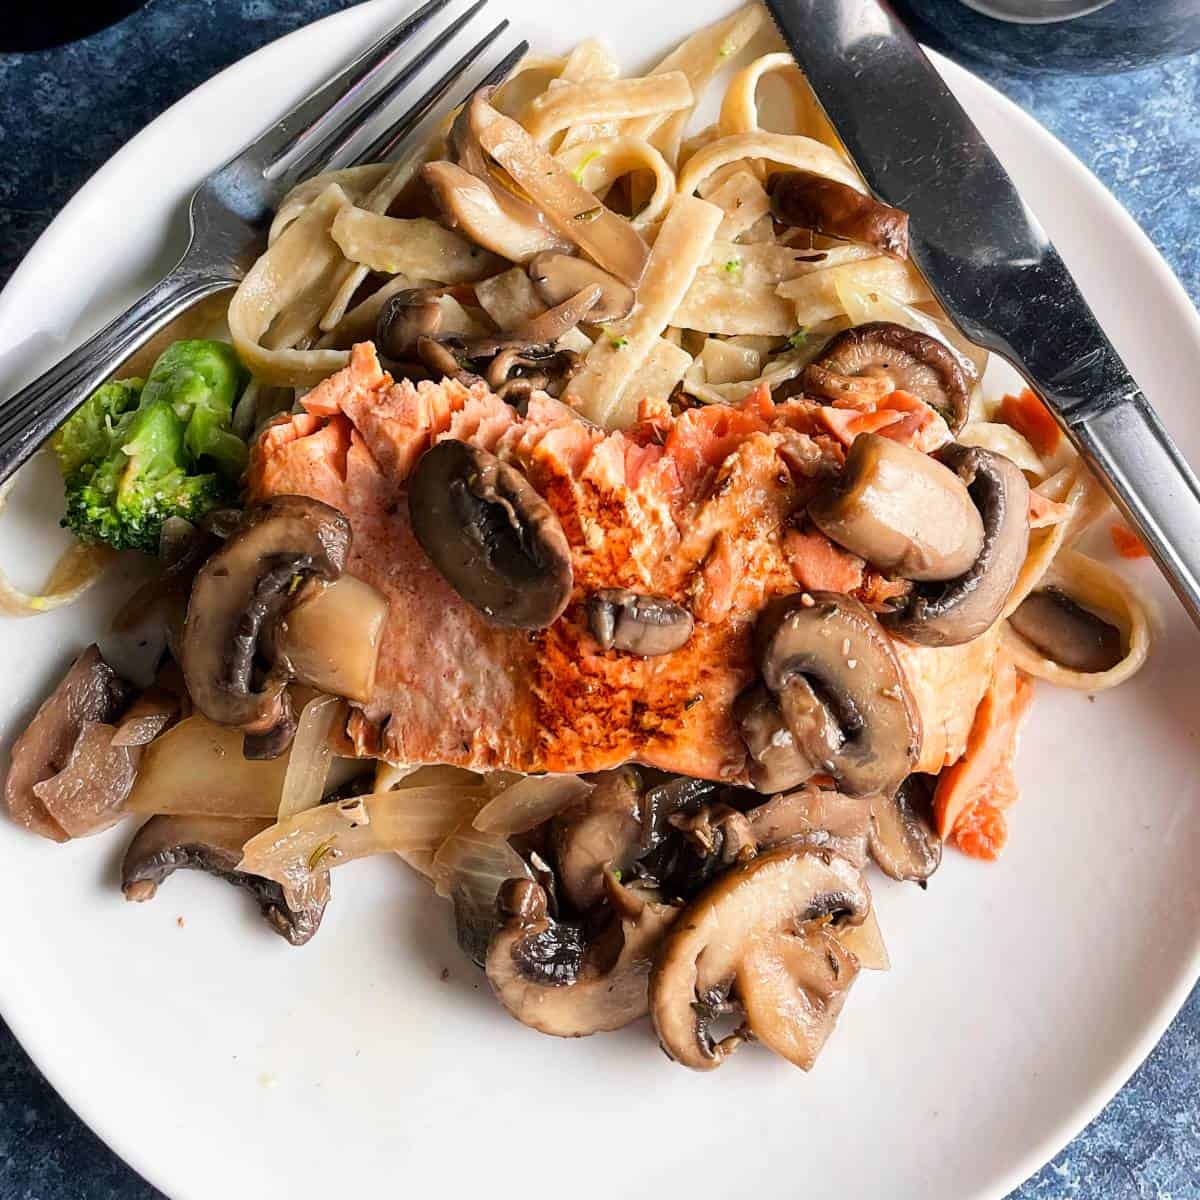 salmon topped with mushrooms, served with pasta.